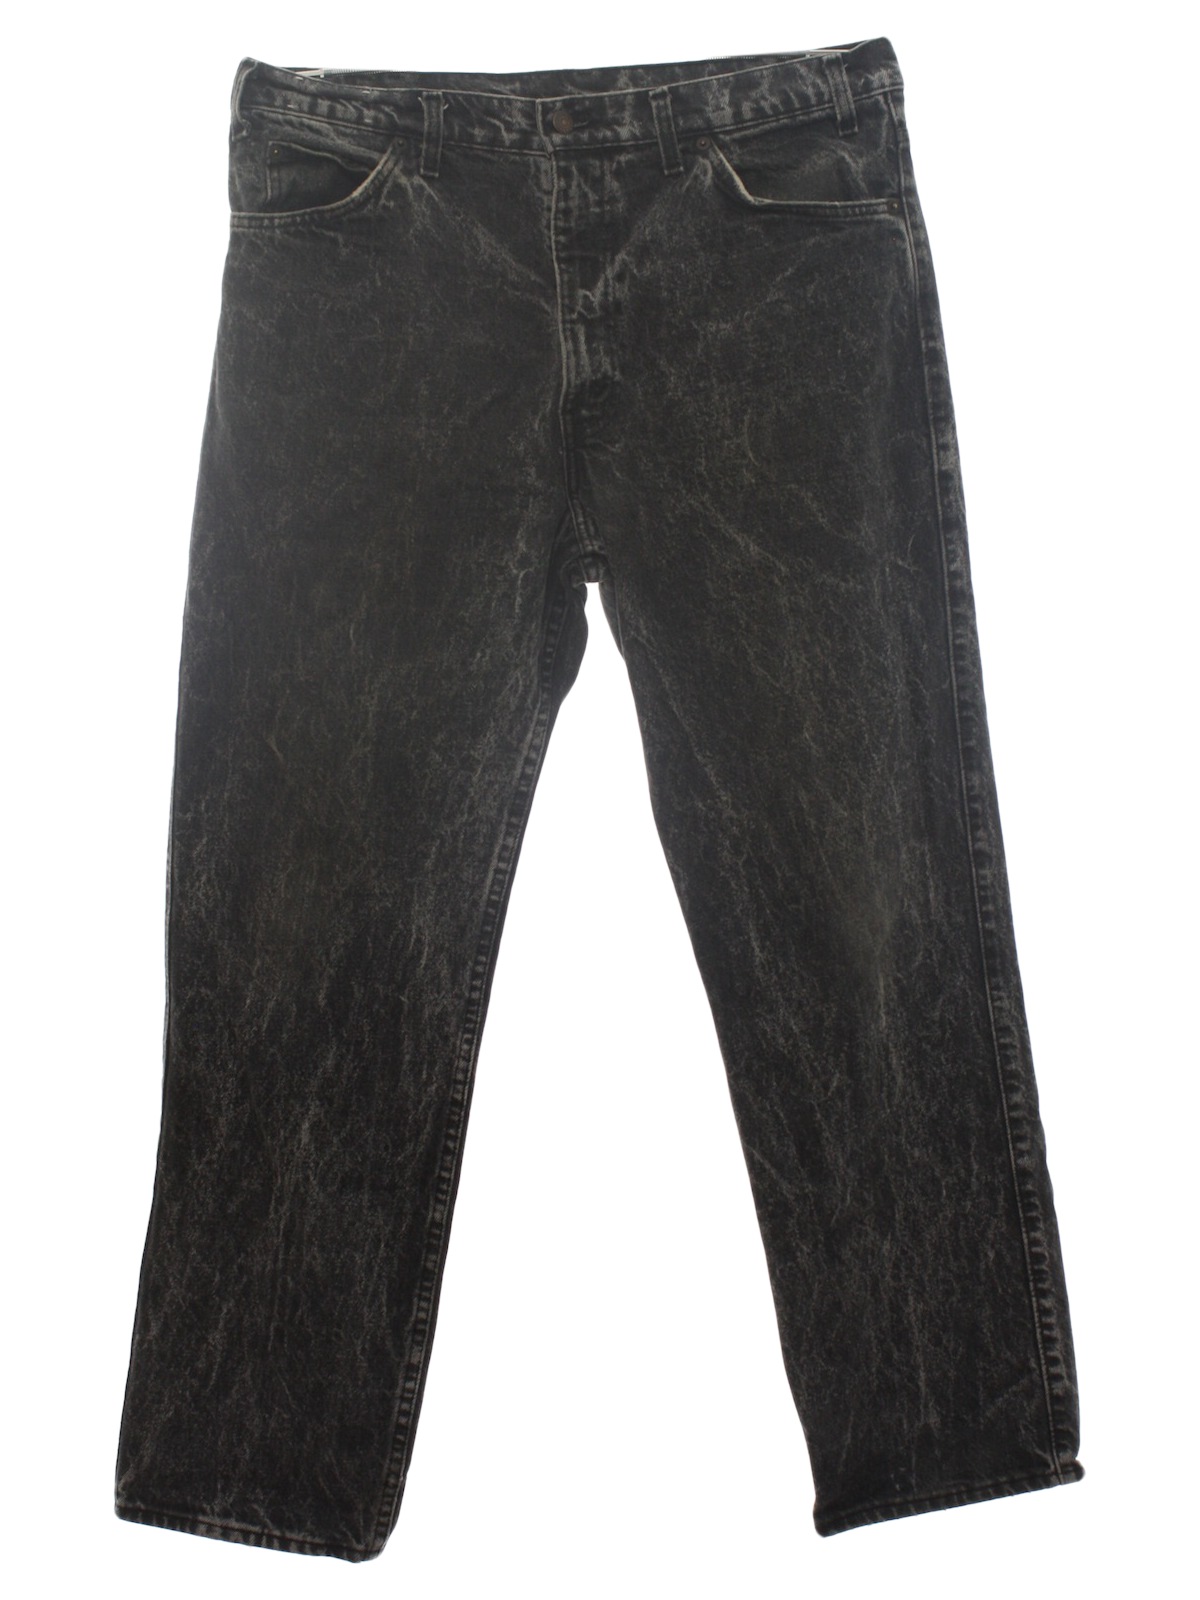 Retro 80's Pants: 80s -Levis Made in USA- Mens grey background stone ...